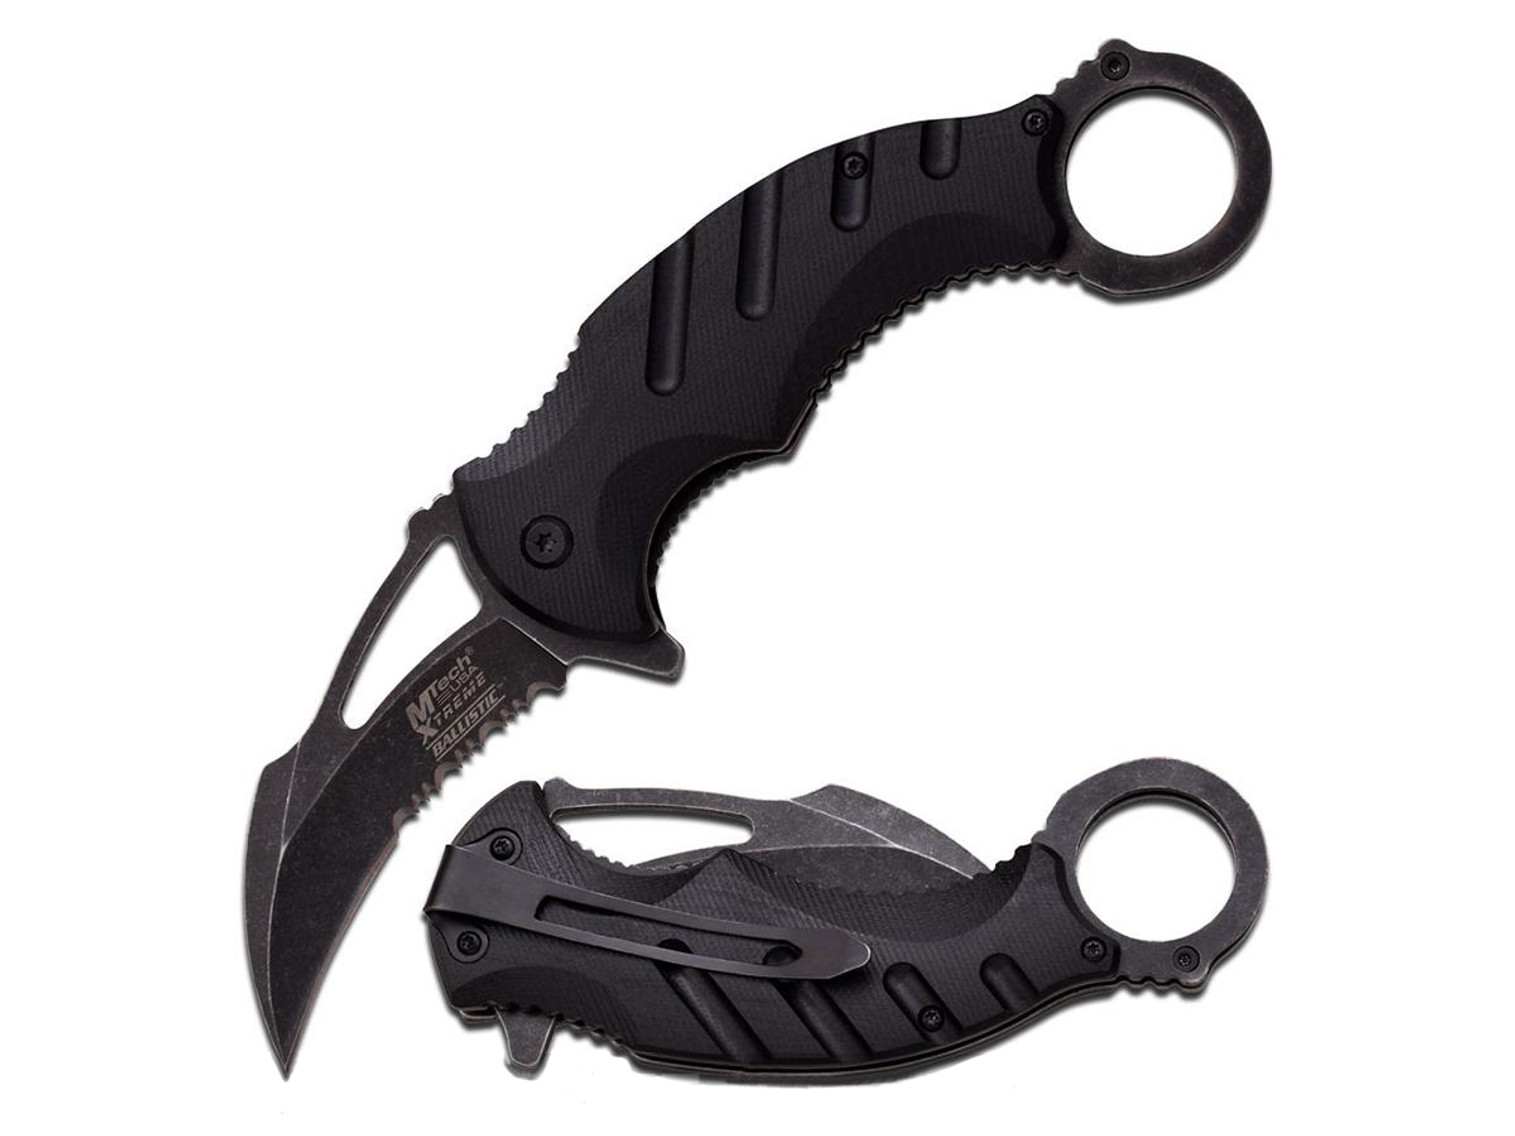 M-Tech 4.75" Spring Assisted Karambit with Stonewashed Blade